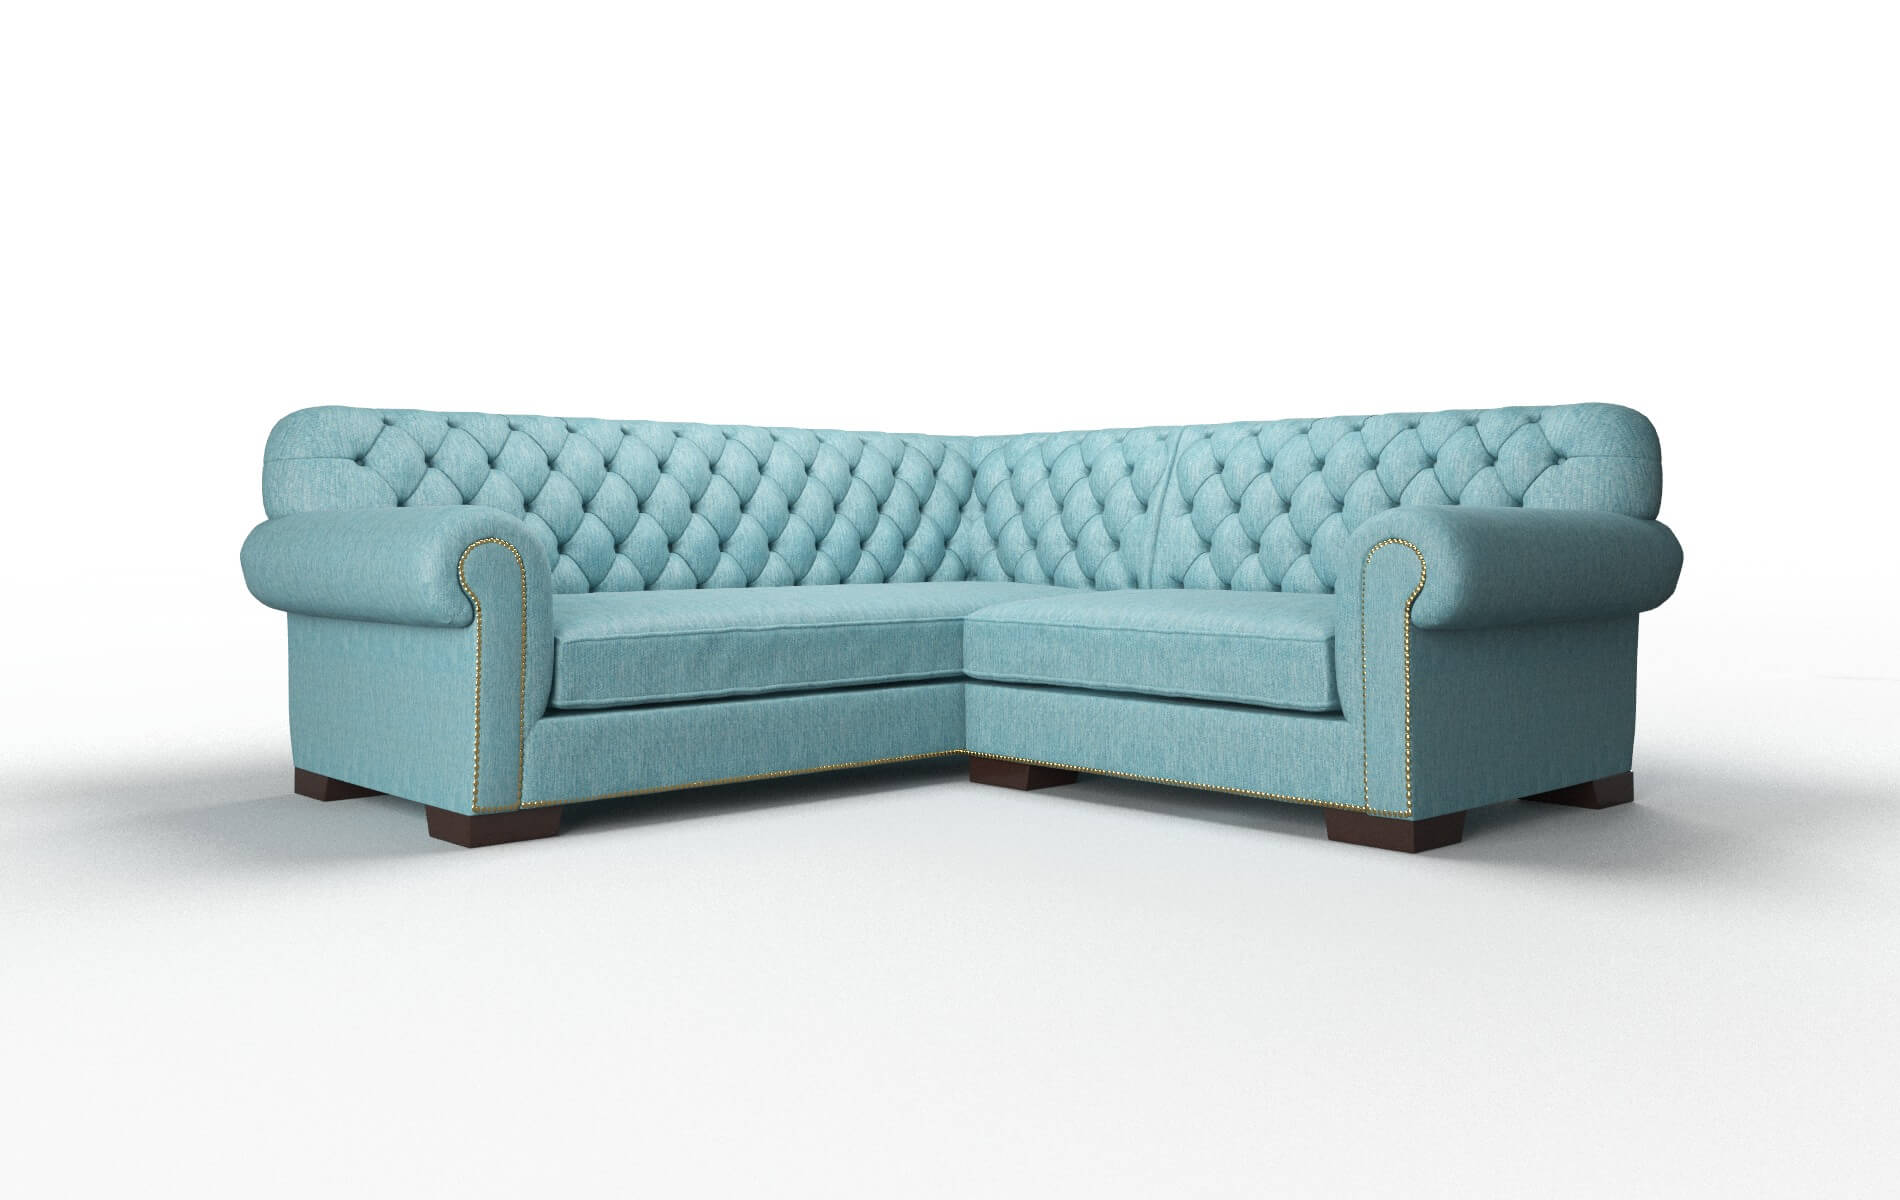 Chester Lana Peacock Sectional espresso legs 1